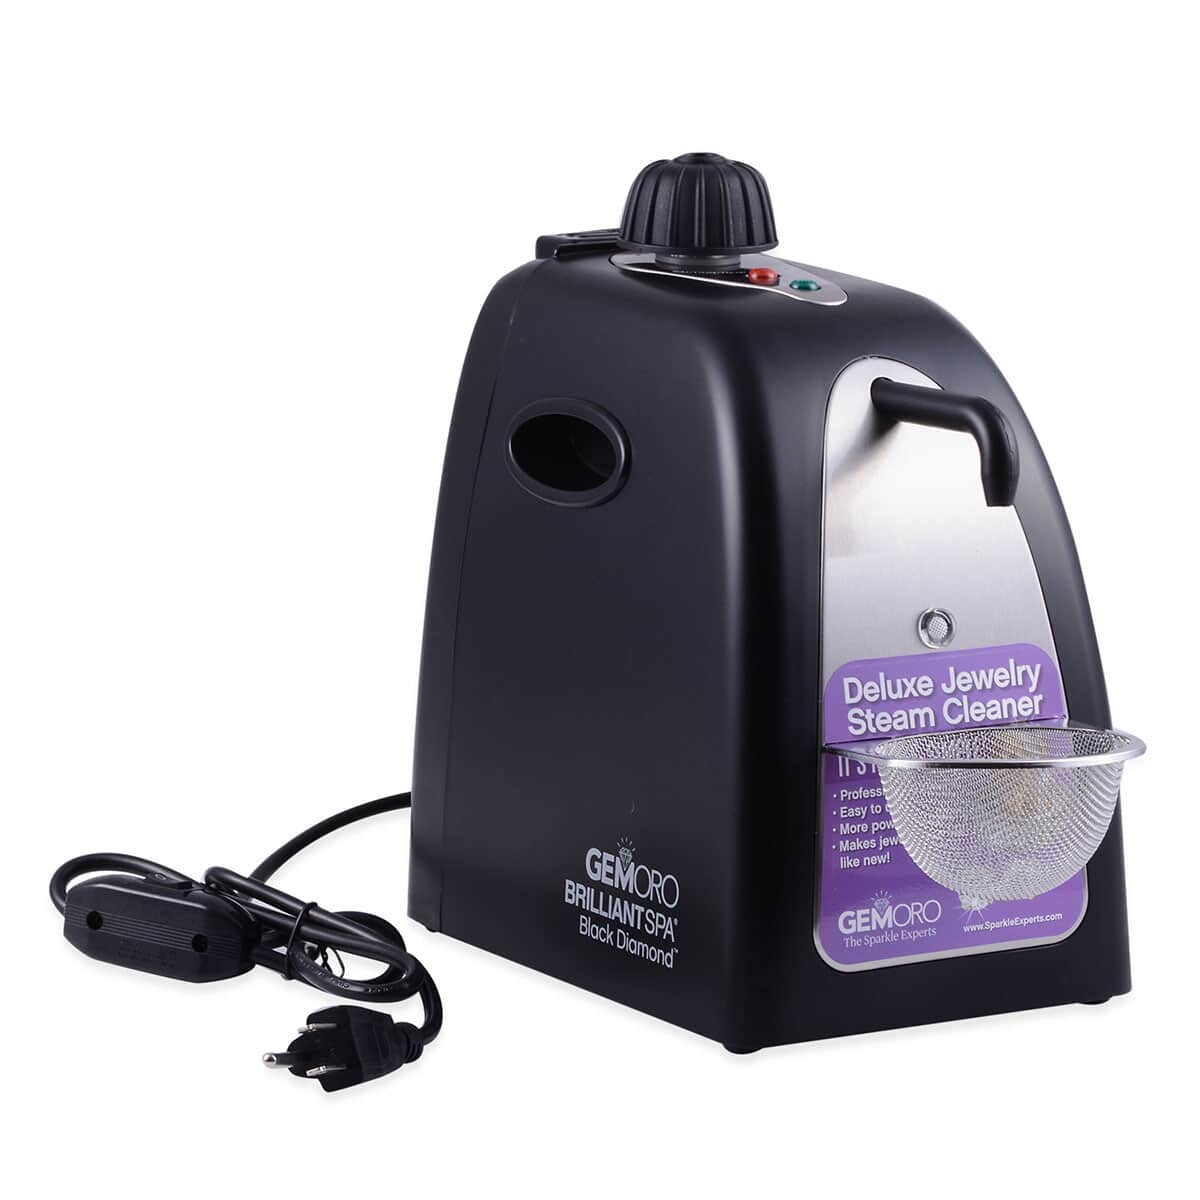 GEMORO Brilliant Spa Black Diamond: Deluxe Personal Jewelry Steam Cleaner image number 0